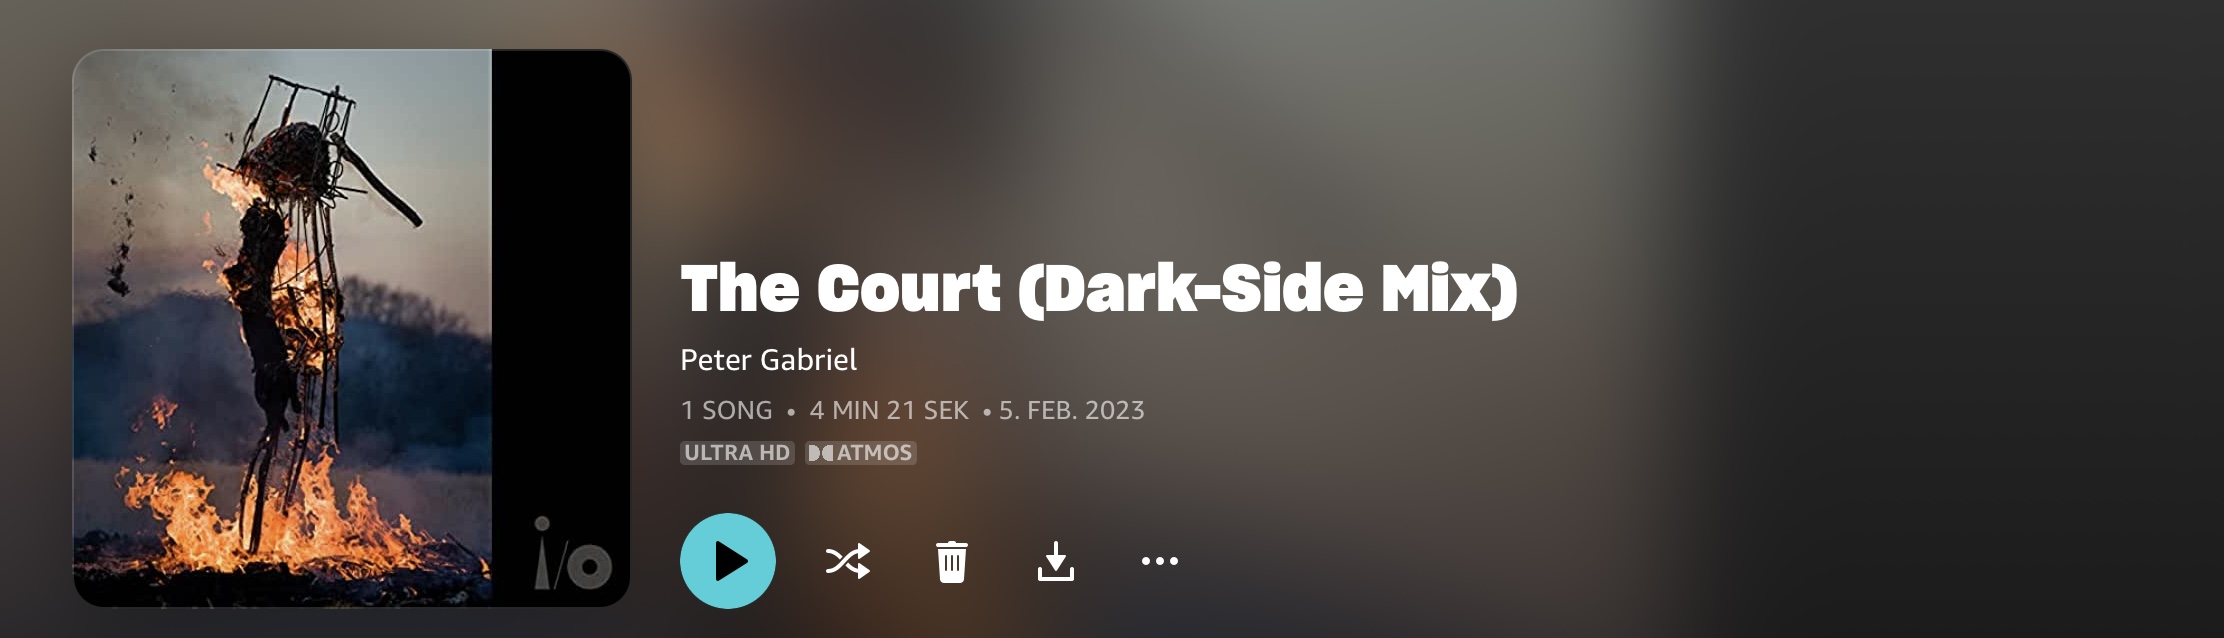 Peter Gabriel The Court In-Side-Mix Dolby Atmos